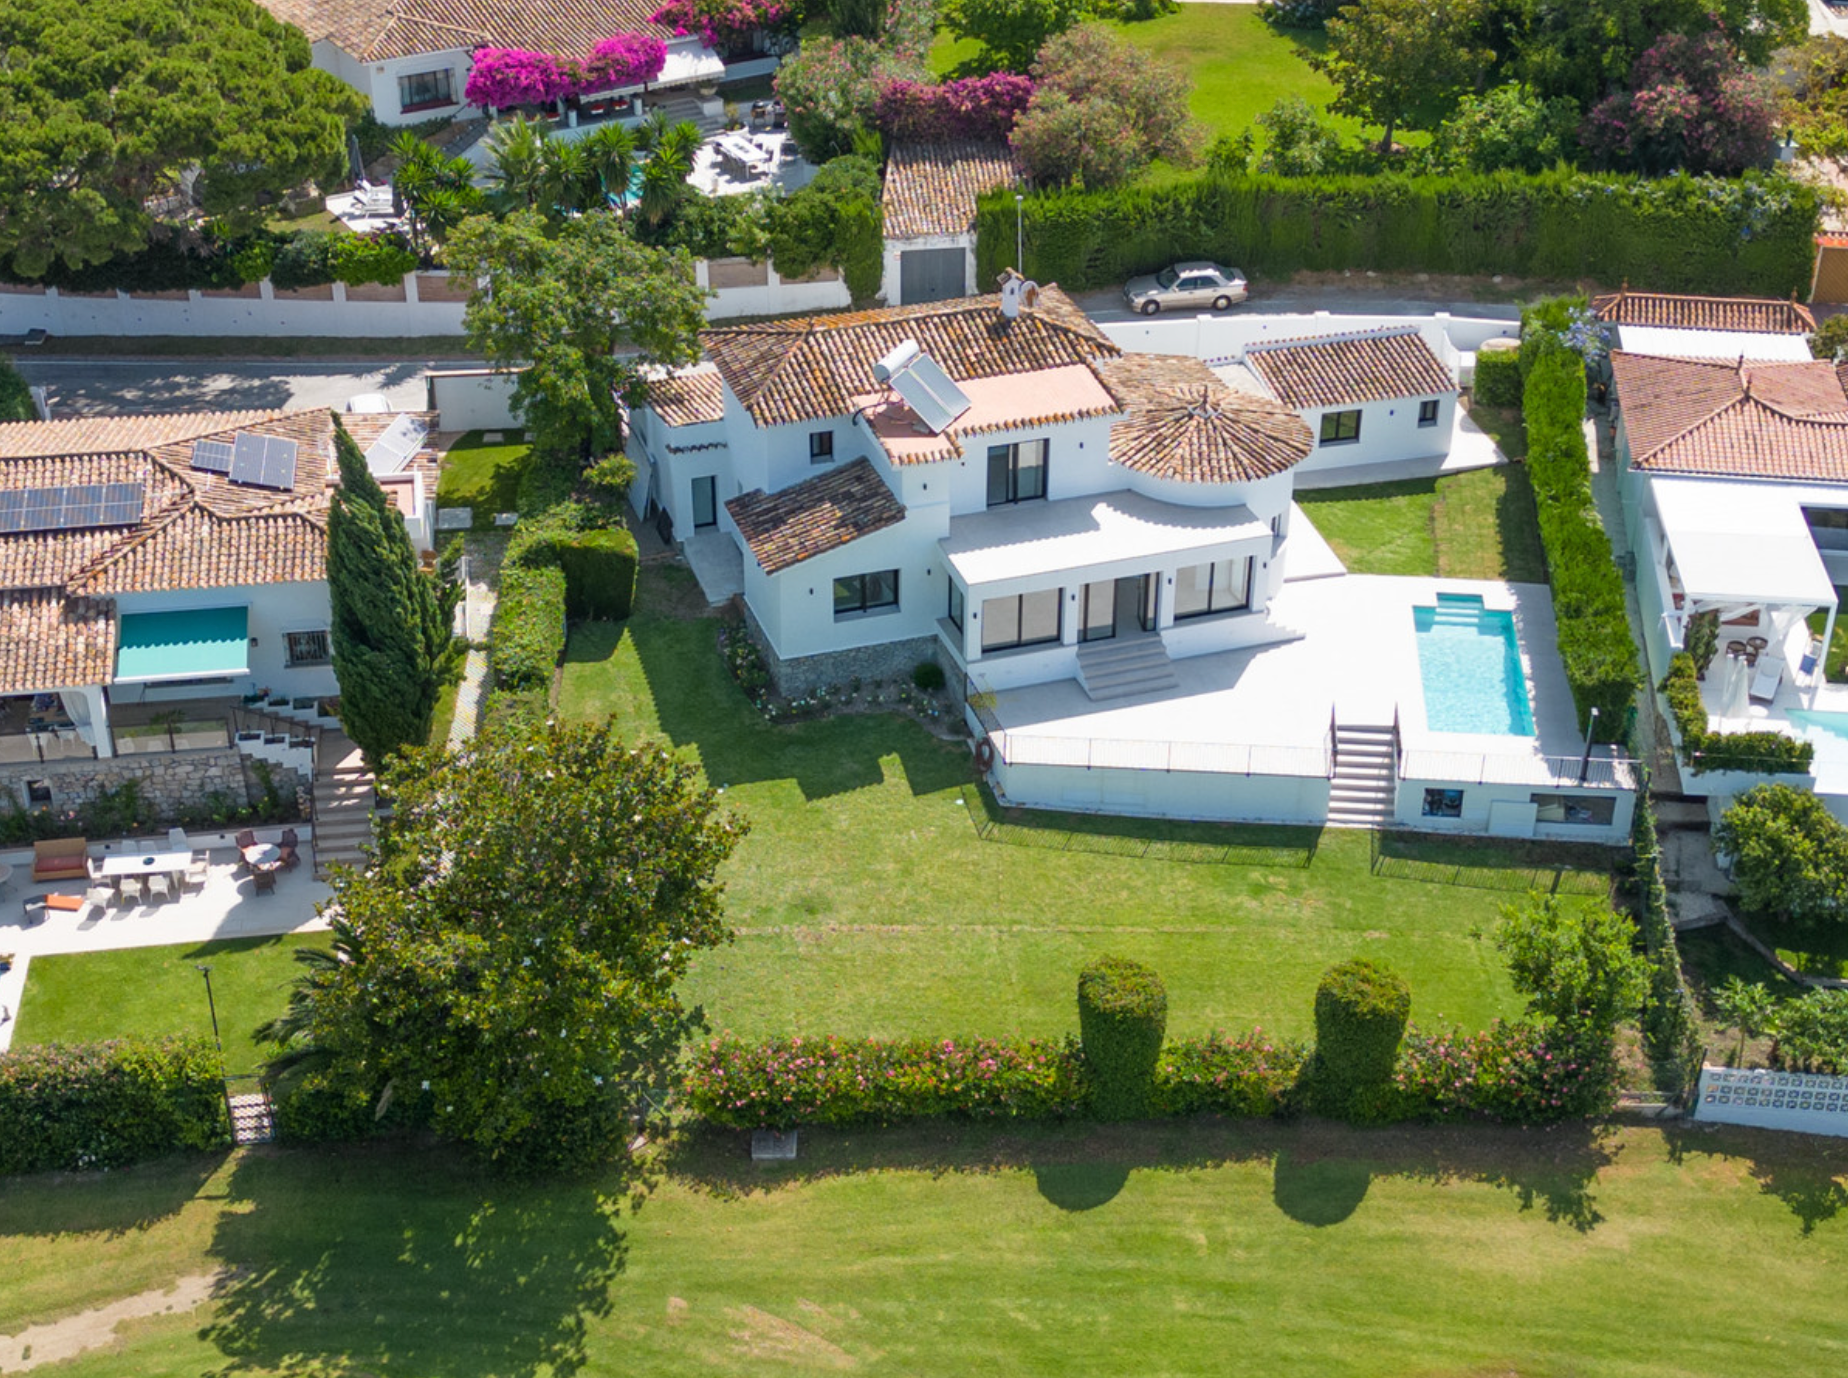 West facing, recently refurbished villa designed in a modern style and located next to the Guadalmina Golf Course